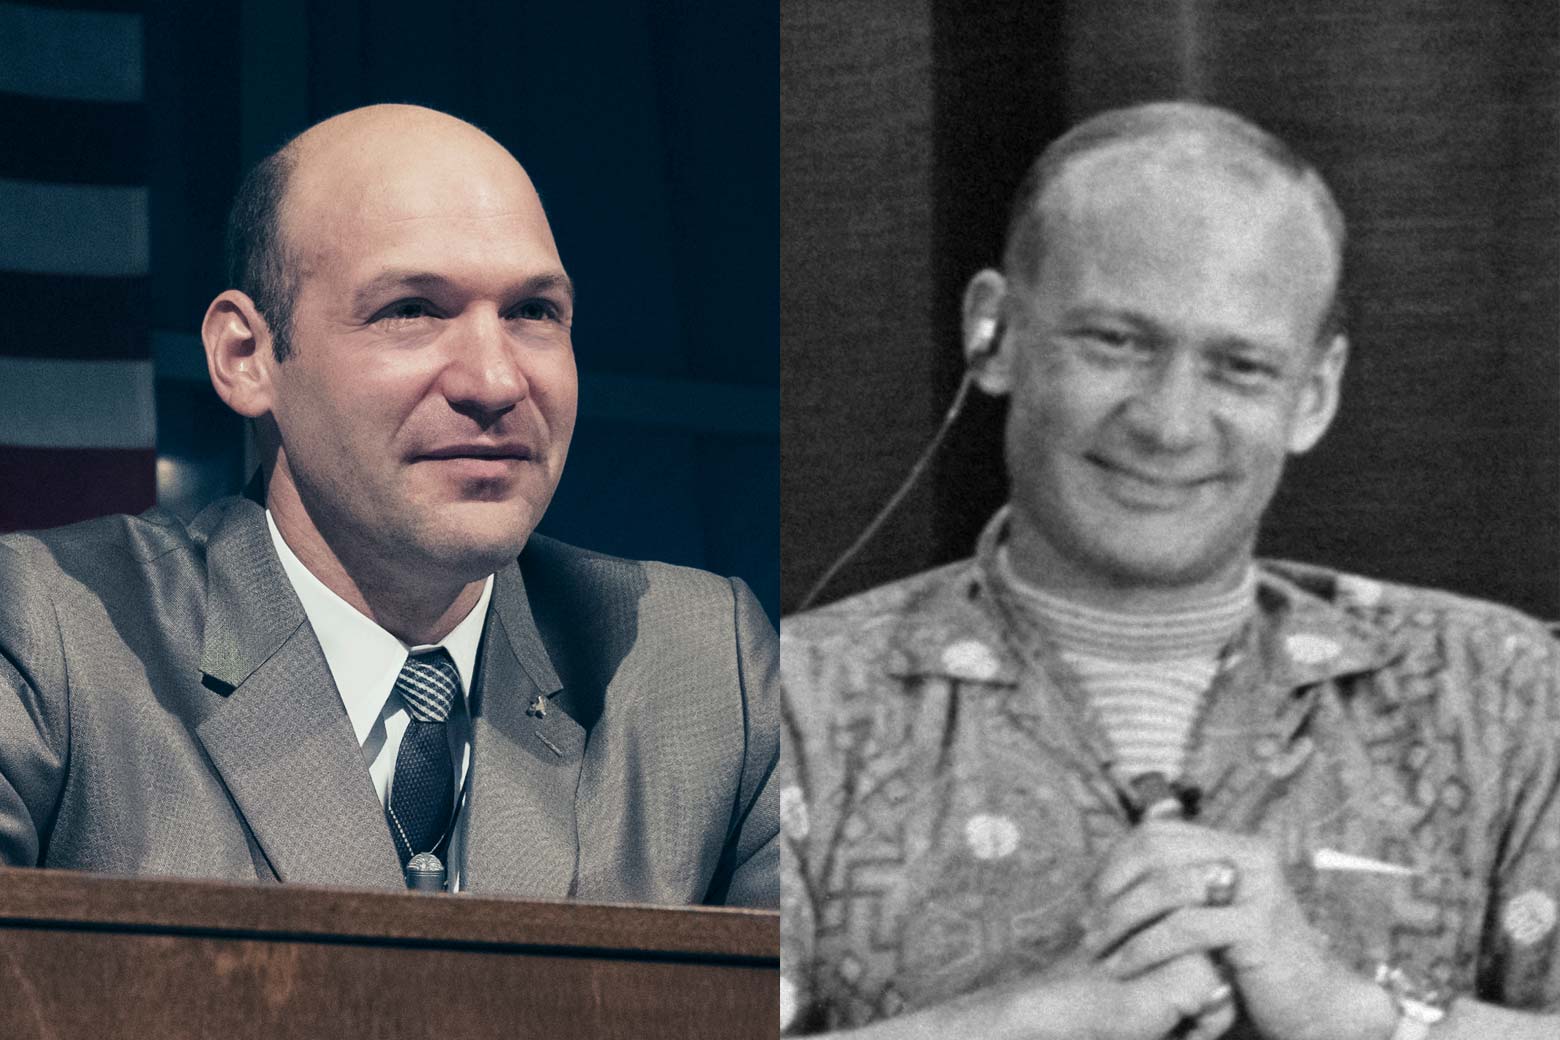 Images of Corey Stoll and Buzz Aldrin.